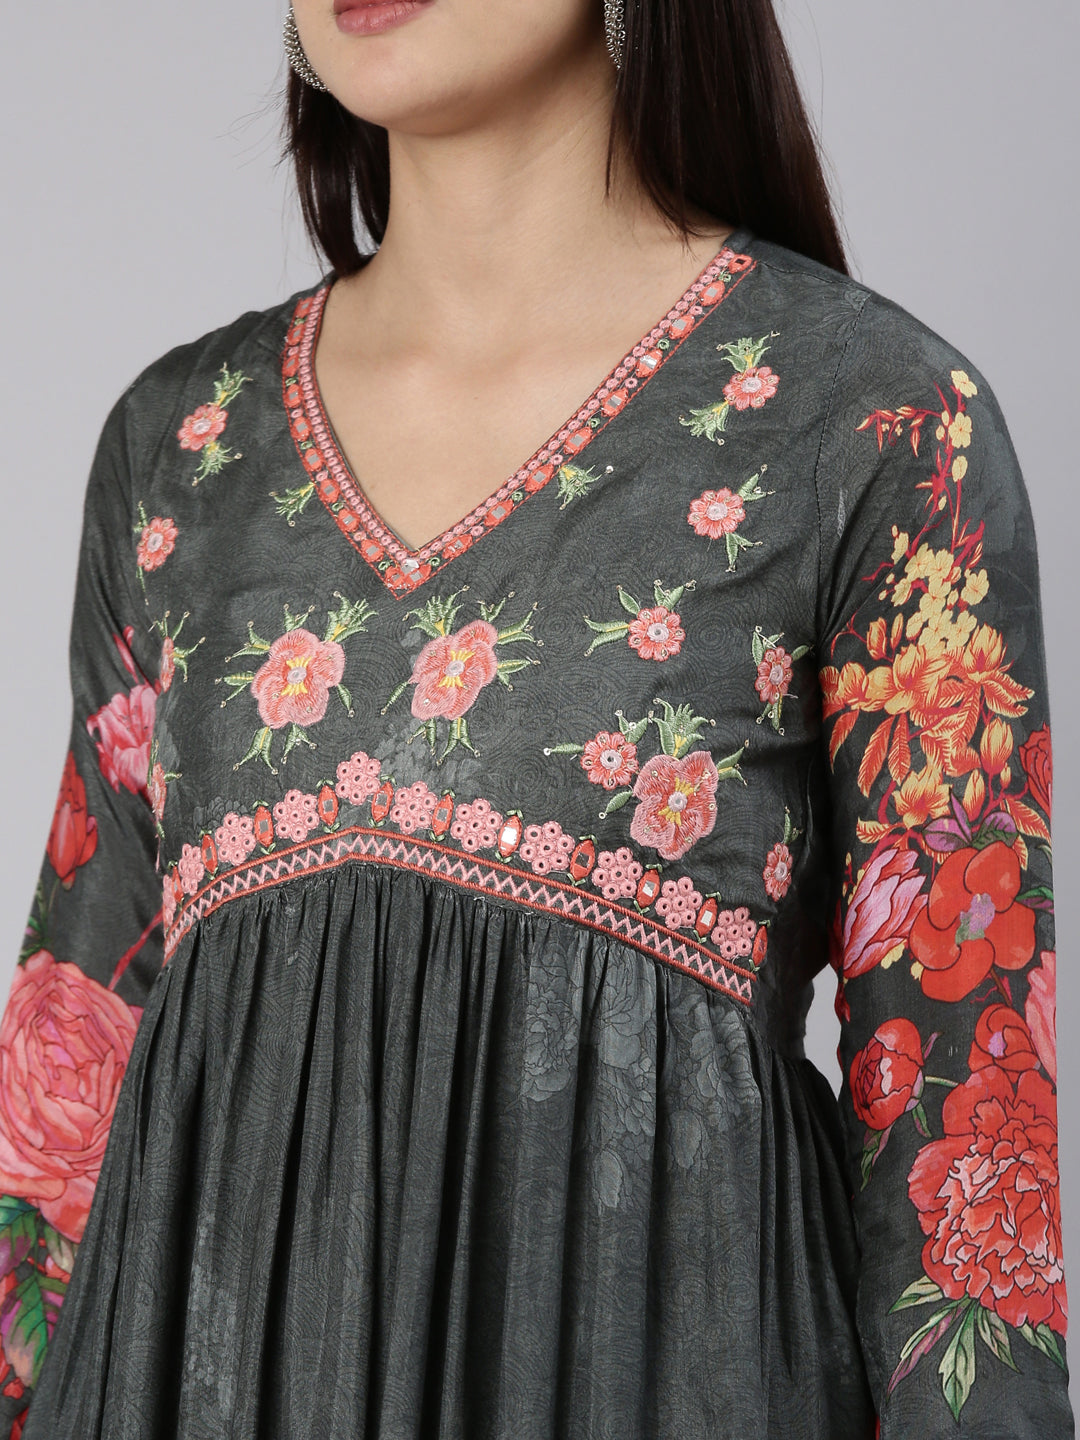 Aggregate more than 70 casual floral dress best